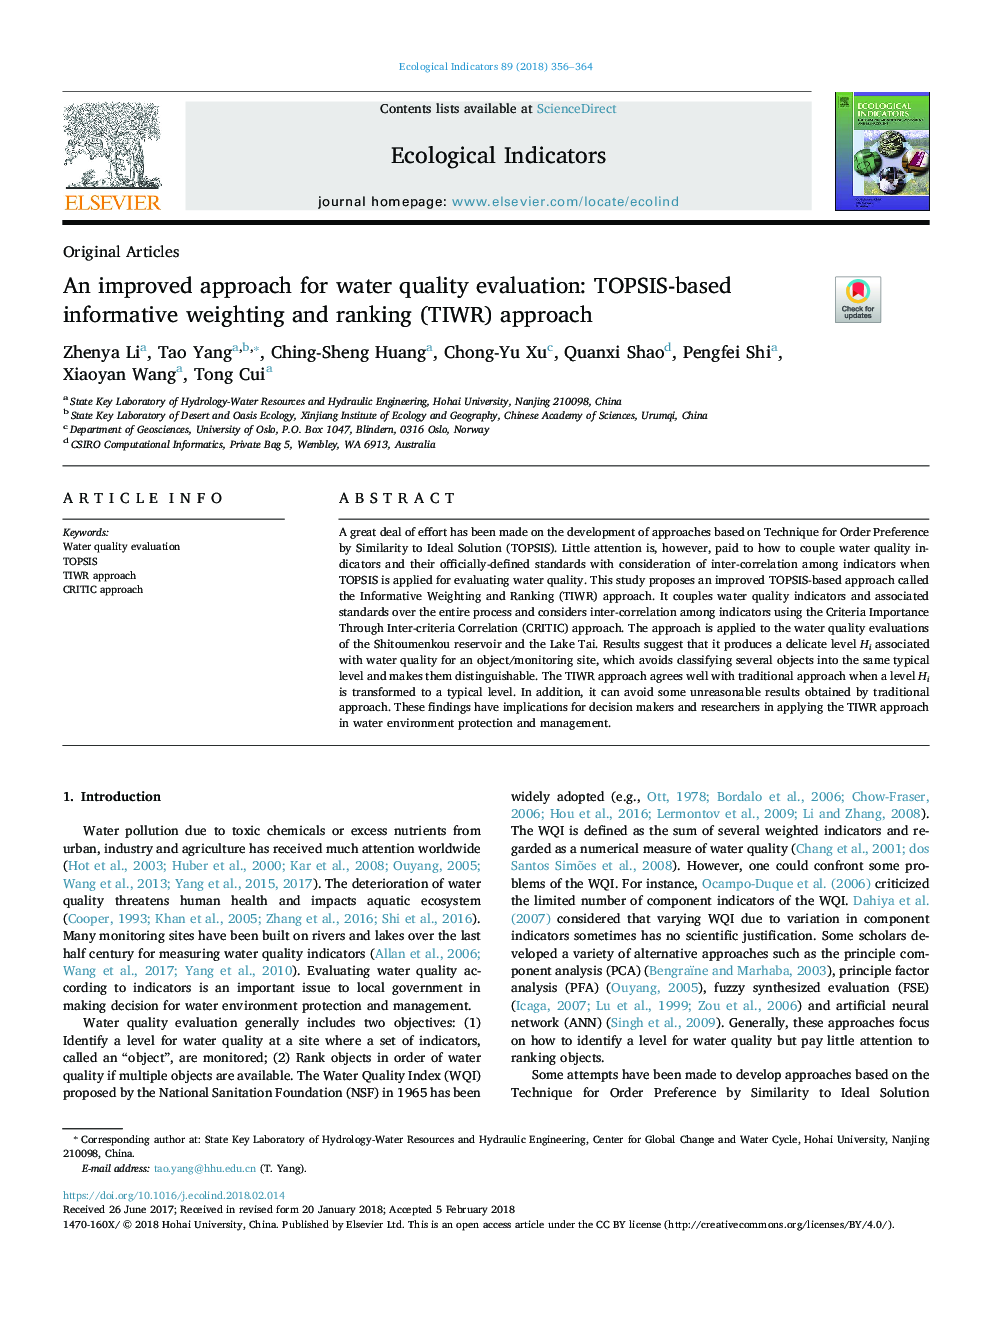 An improved approach for water quality evaluation: TOPSIS-based informative weighting and ranking (TIWR) approach